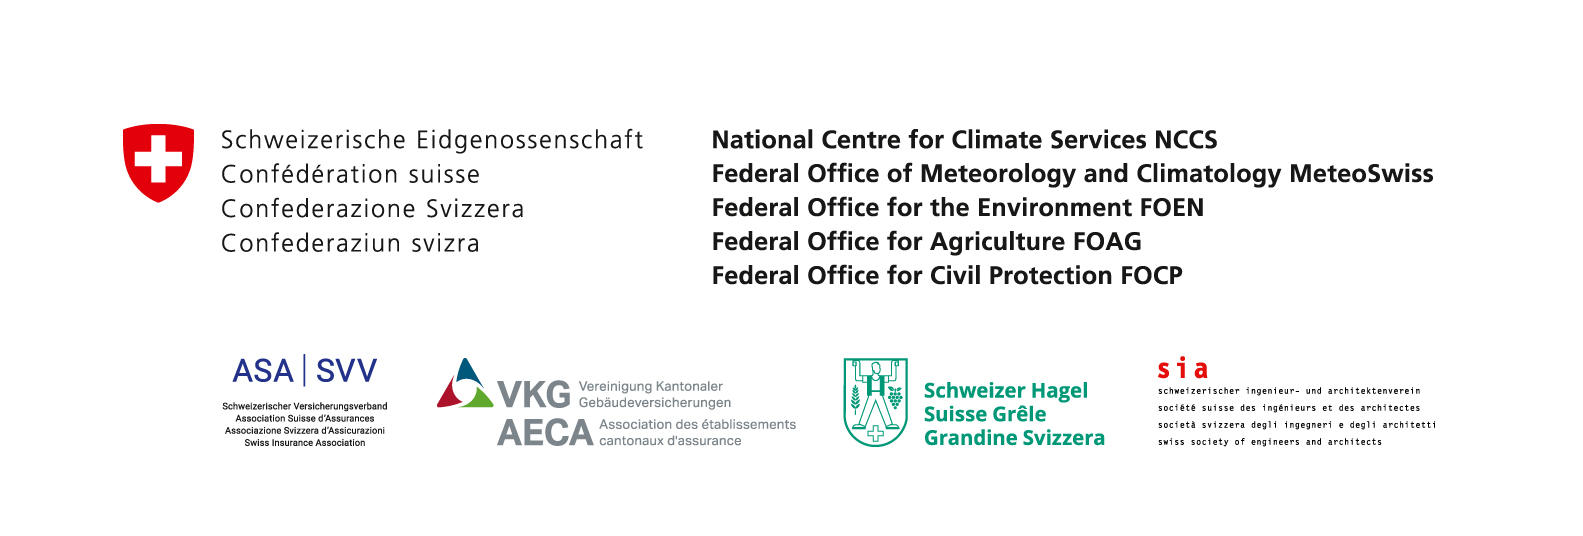 Logo of the project "Hail Climate Switzerland" with the project partners: Foundation for Prevention of the Public Insurance Companies for Real Estate FPPIRE, Swiss Insurance Association SVV, Swiss Hail Insurance Schweizer Hagel, Swiss Society of Engineers and Architects SIA, Federal Office of Meteorology and Climatology MeteoSwiss, The Federal Office for the Environment FOEN, Federal Office for Agriculture FOAG and Federal Office for Civil Protection FOCP.